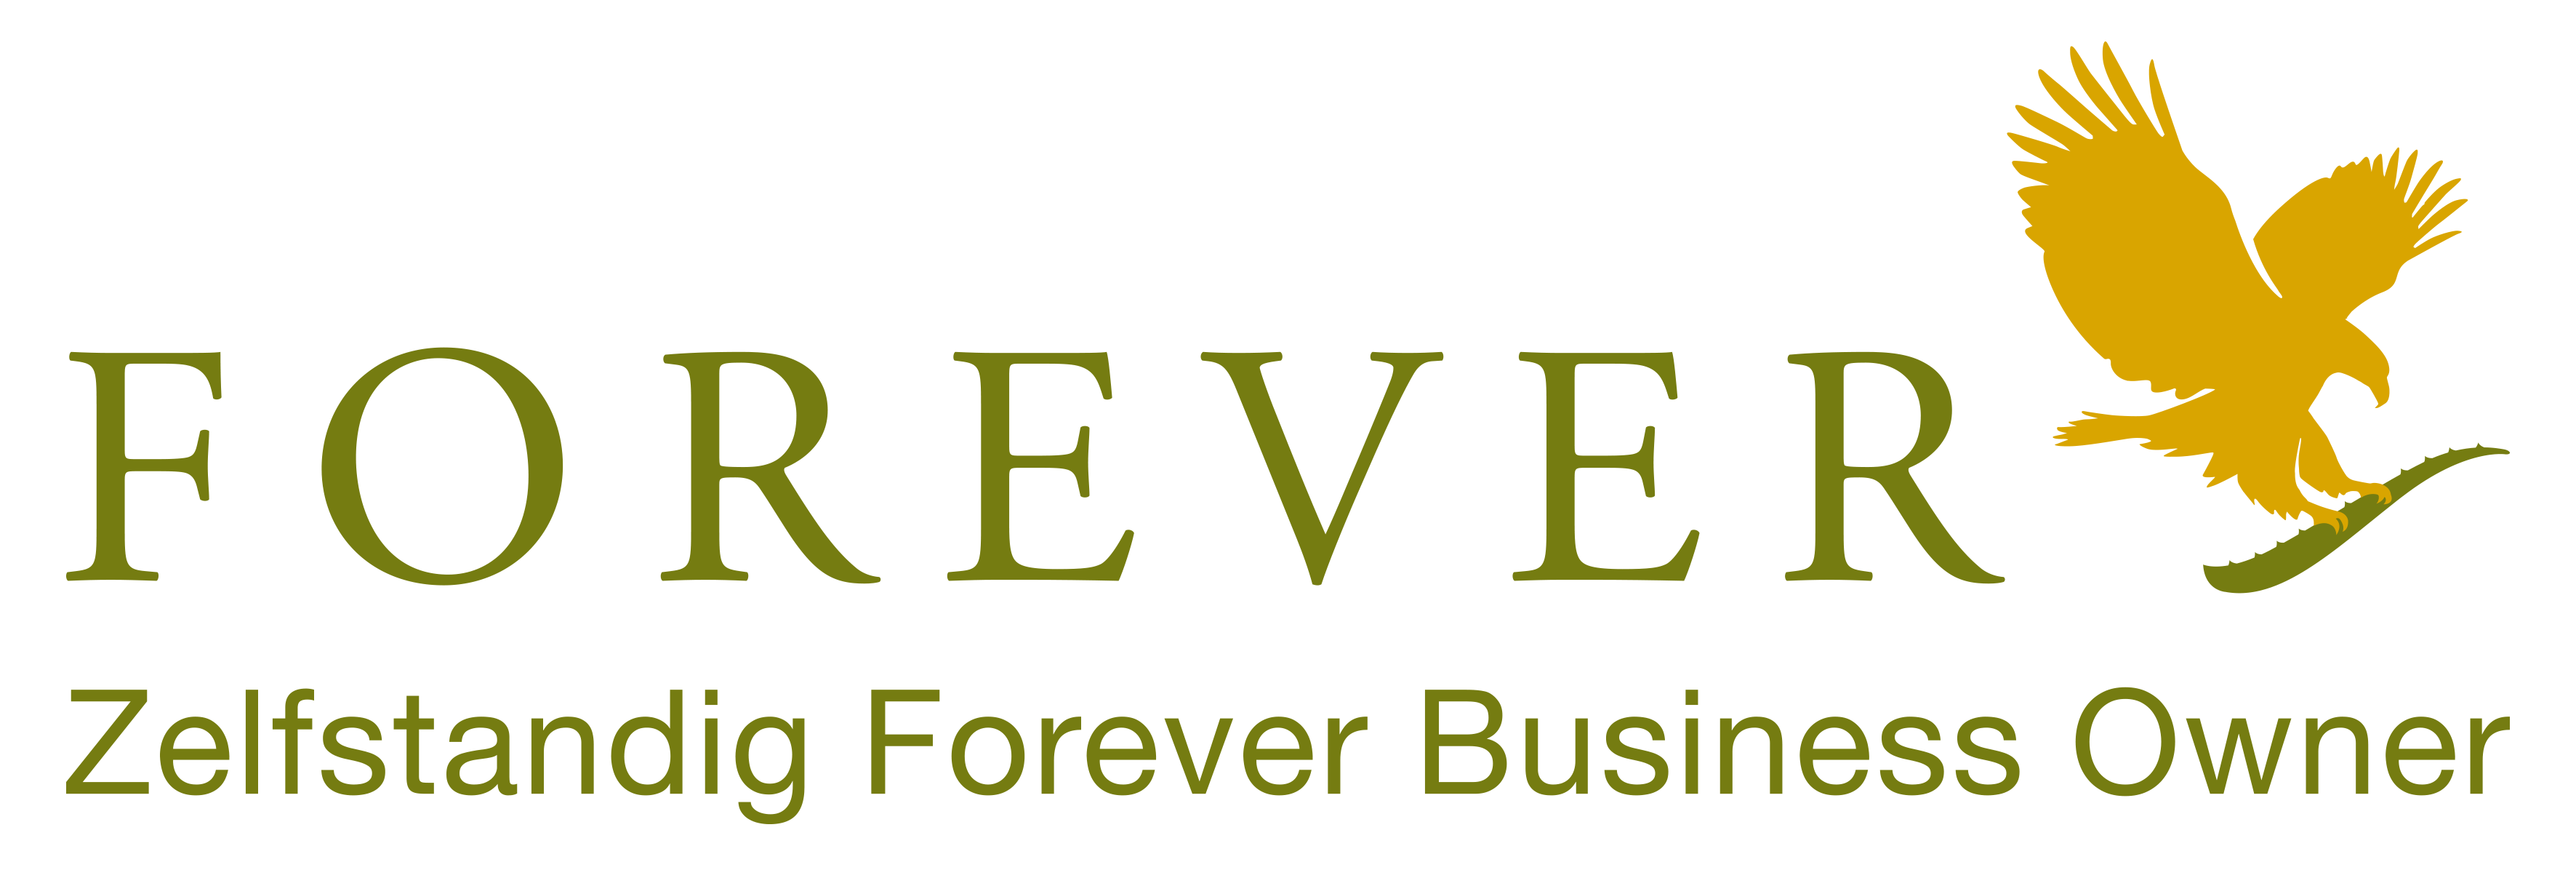 Forever Aloe vera supplies Forever products to customers in Benelus and France as an Independent Business Owner for Forever Living. Buy your products from Forever Living in Belgium, the Netherlands, Luxembourg and France